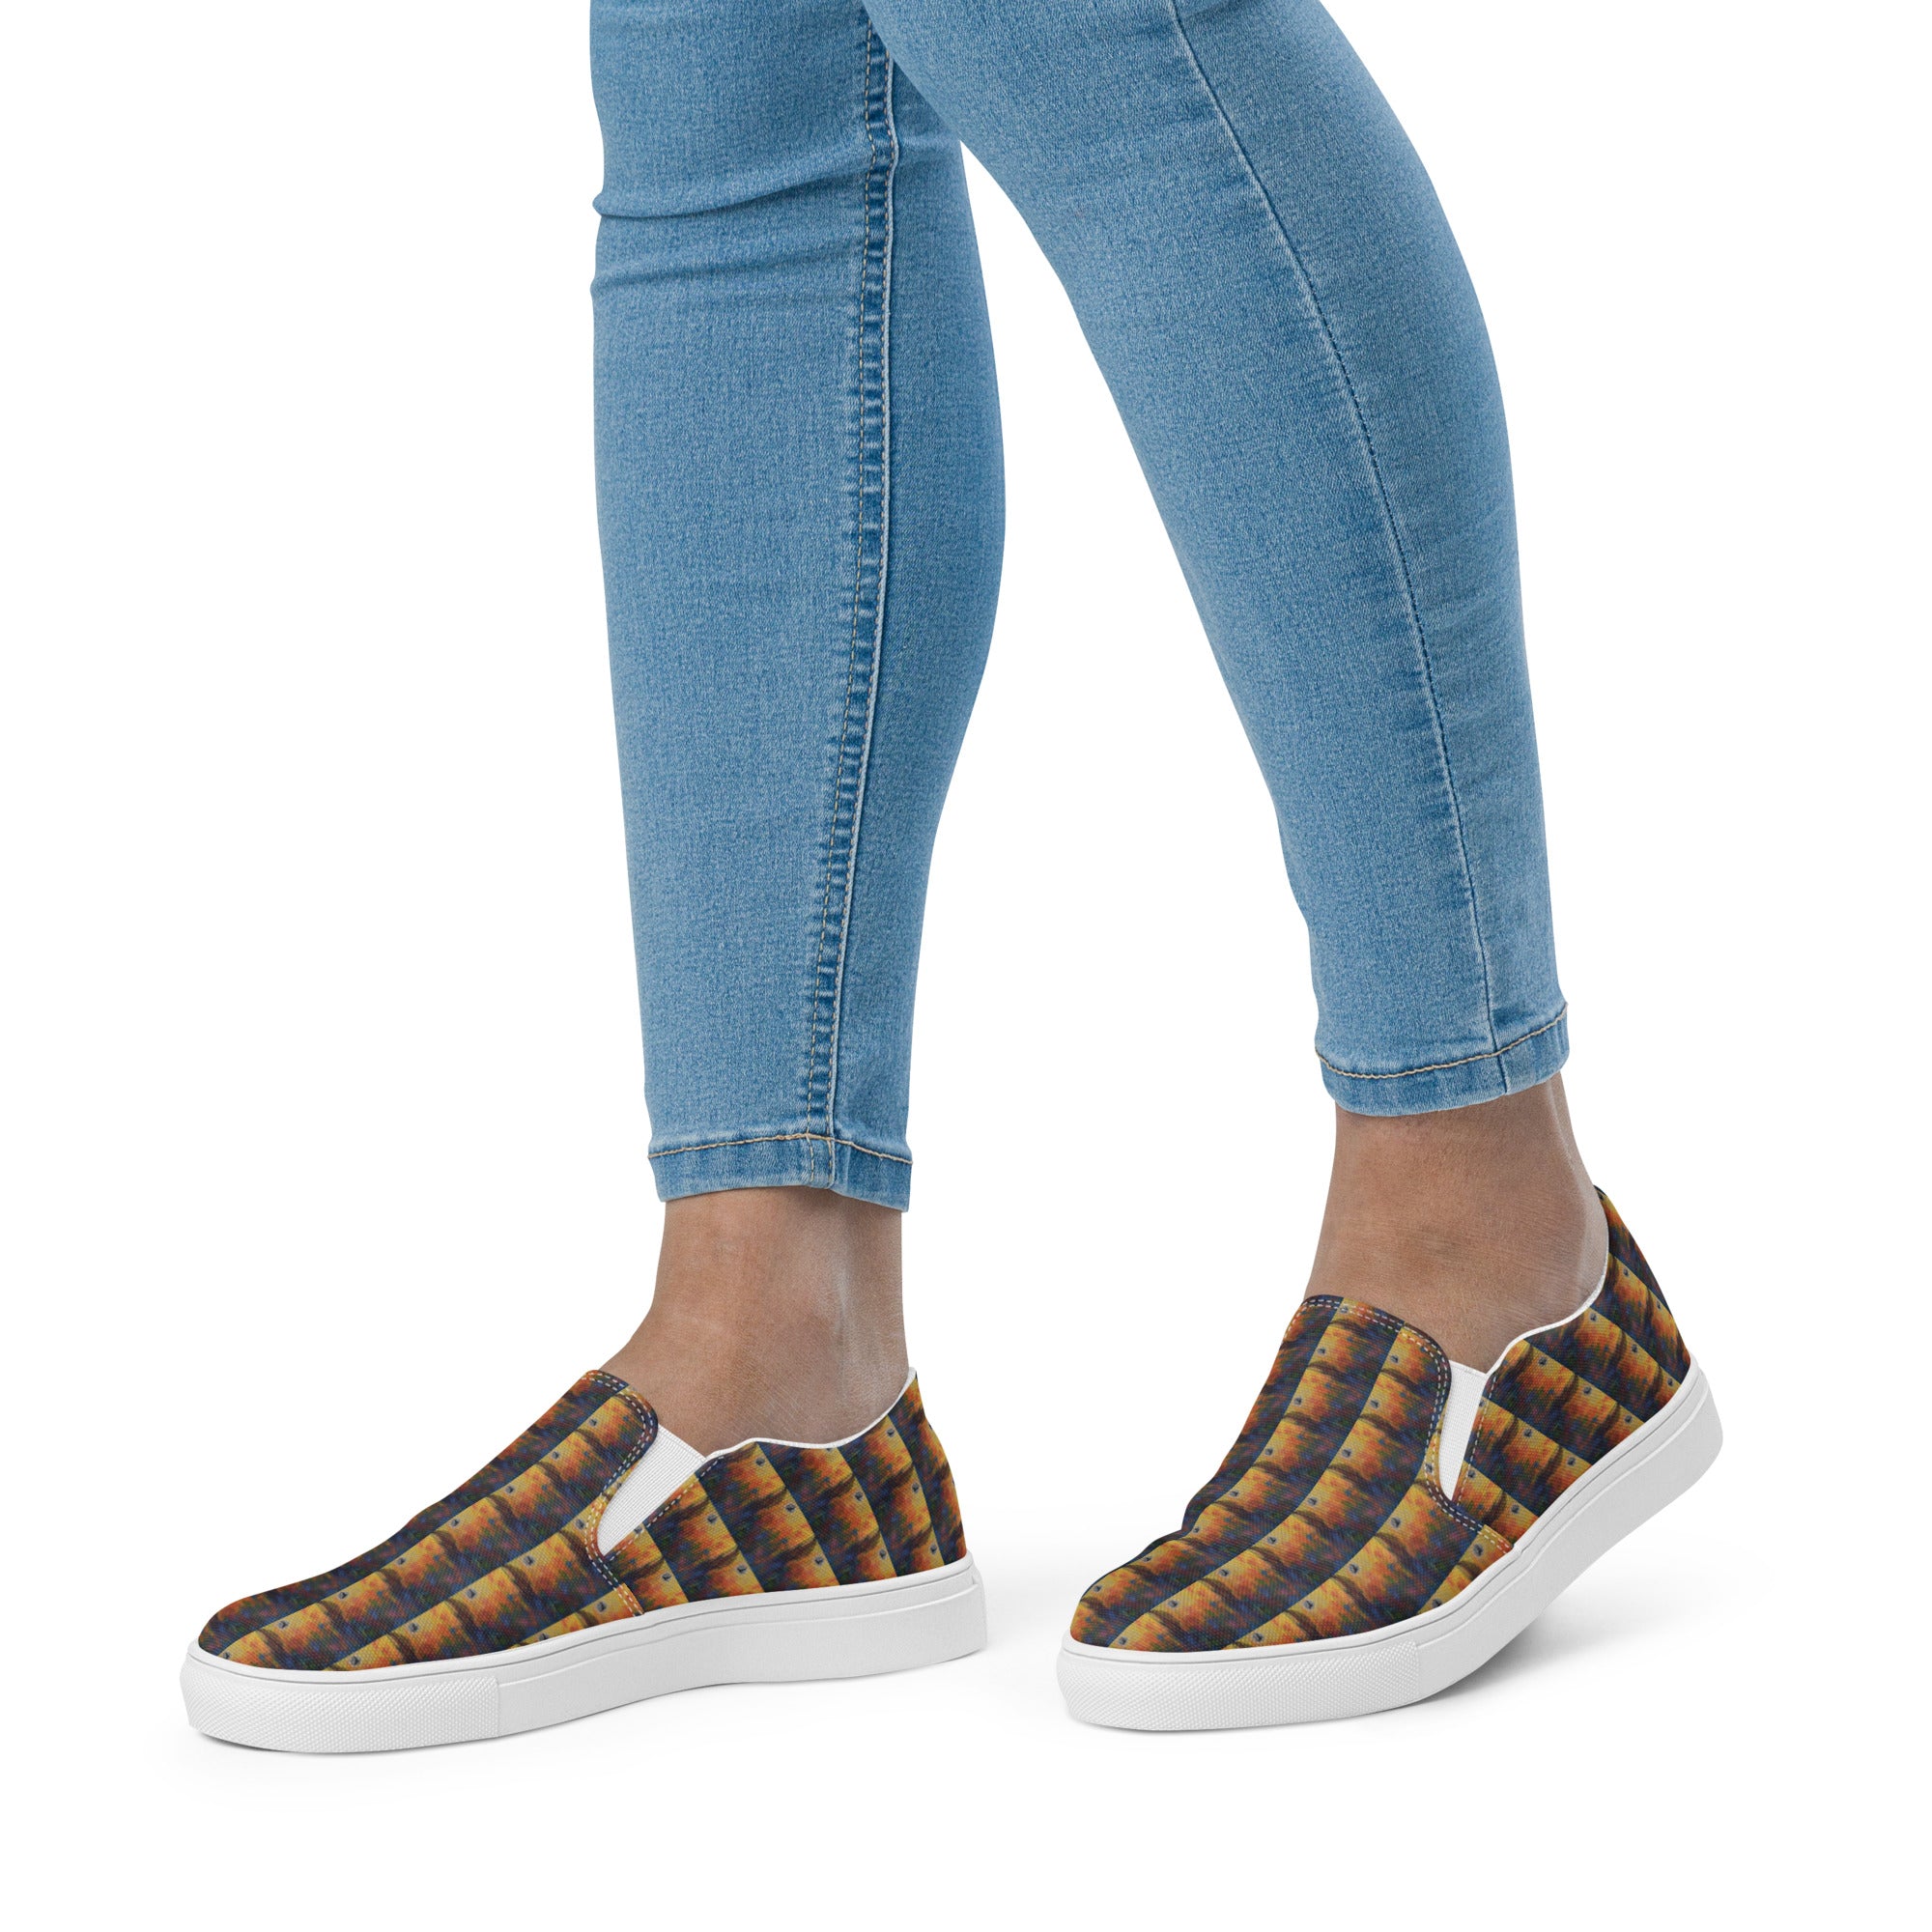 Fly with Me Women’s Slip On